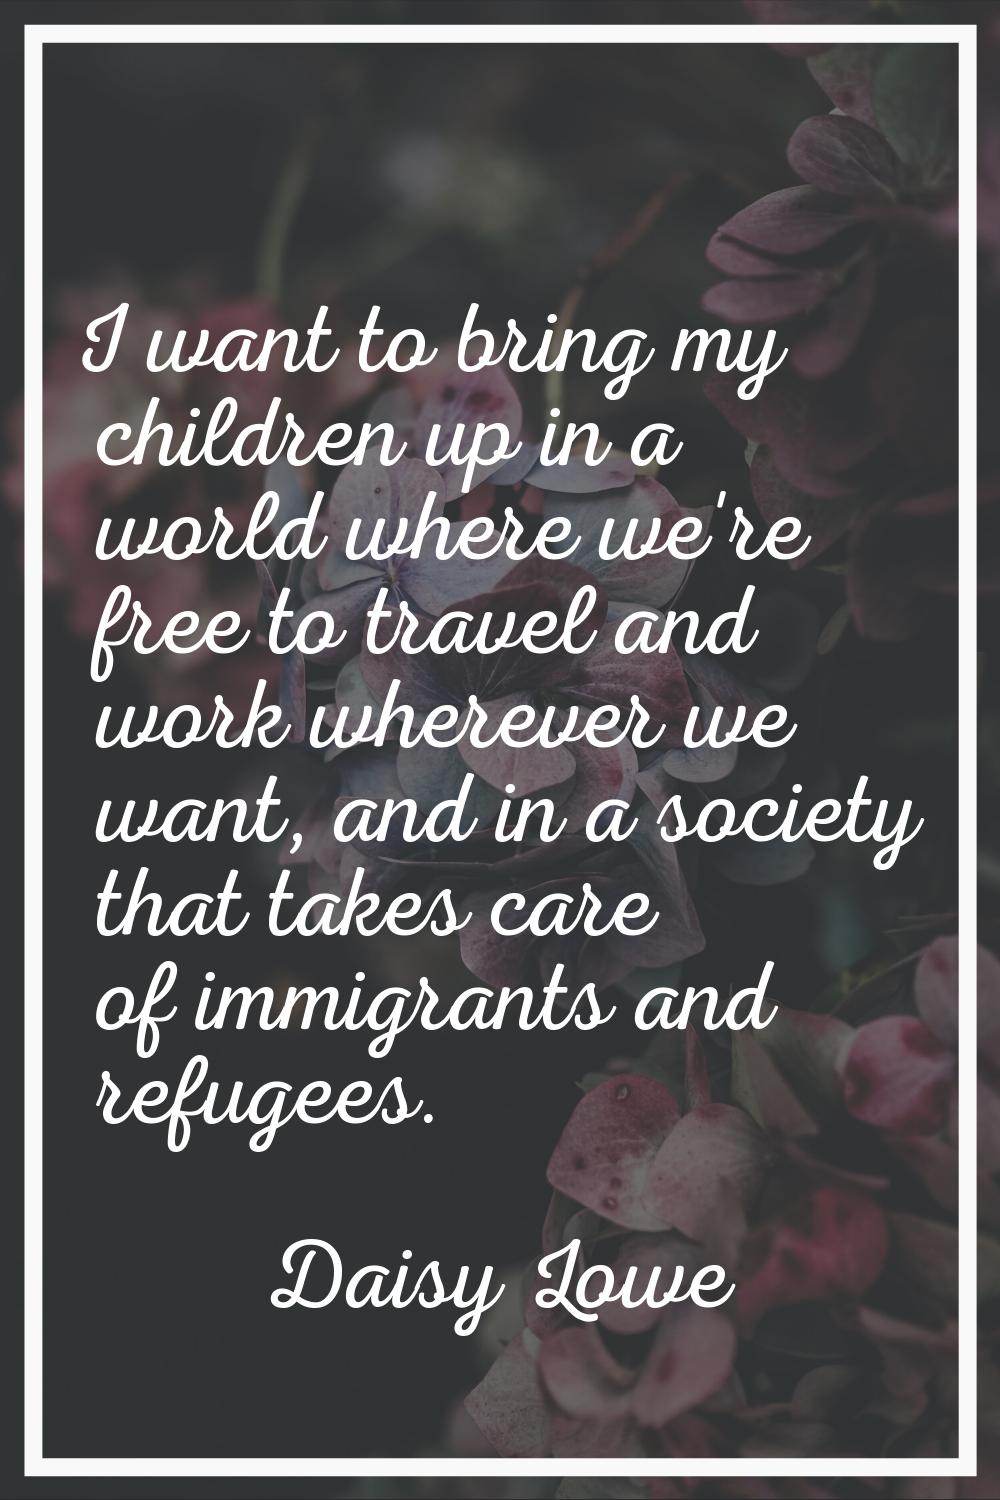 I want to bring my children up in a world where we're free to travel and work wherever we want, and